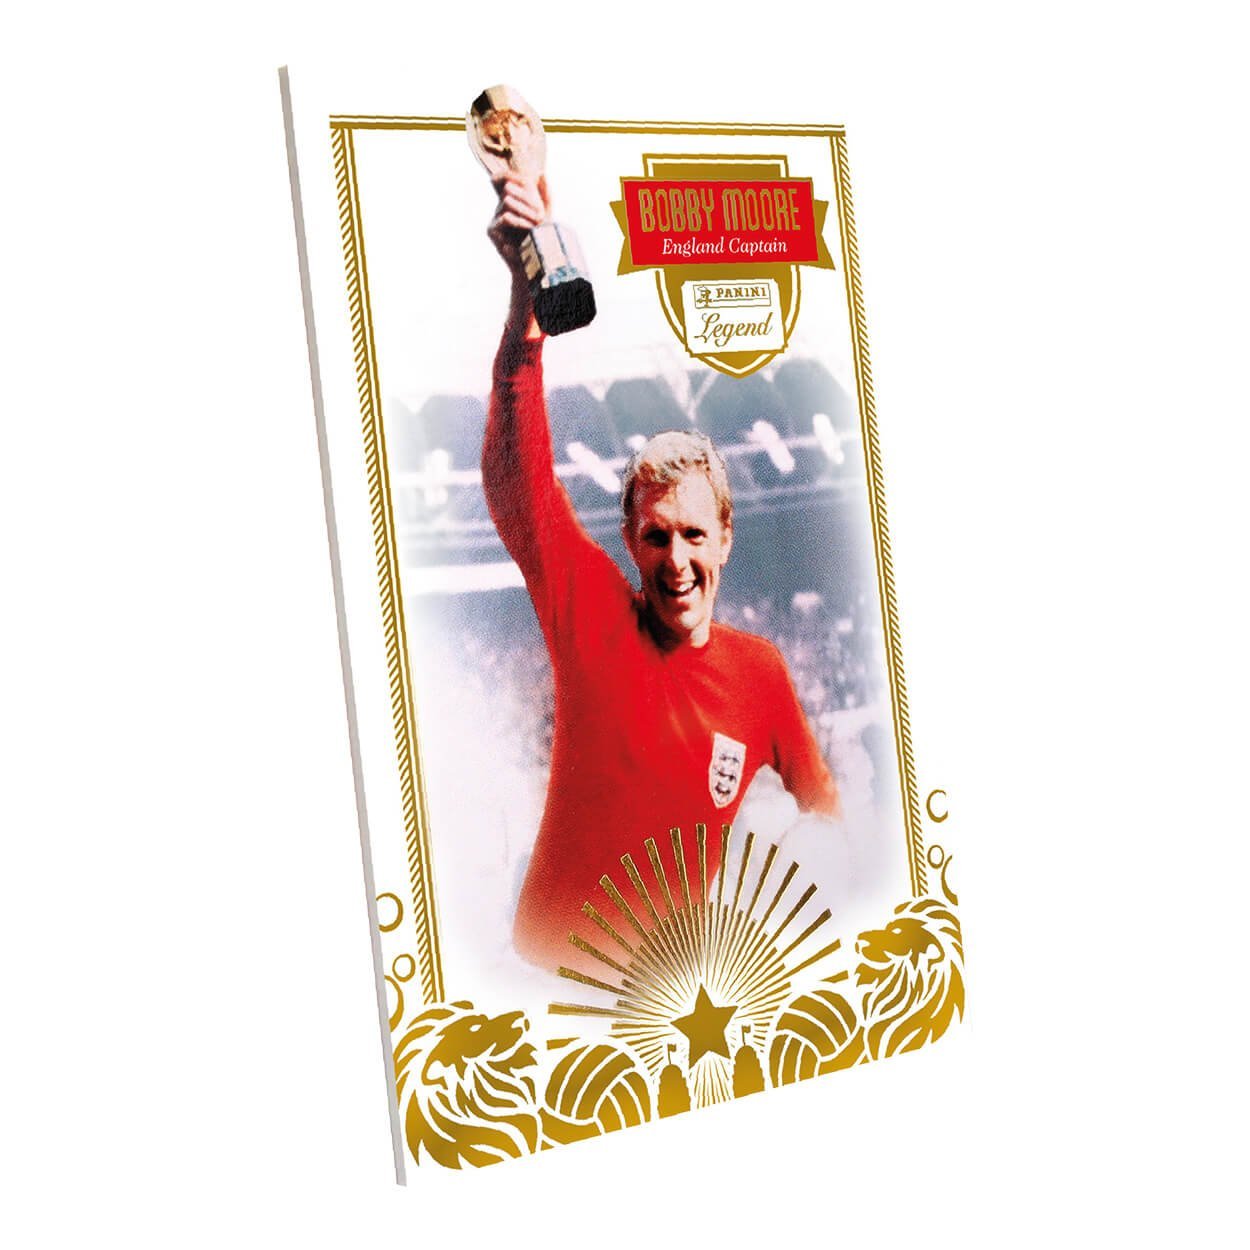 Panini| Panini's Bobby Moore Limited Edition 1966 Card | Earthlets.com |  | Trading Cards